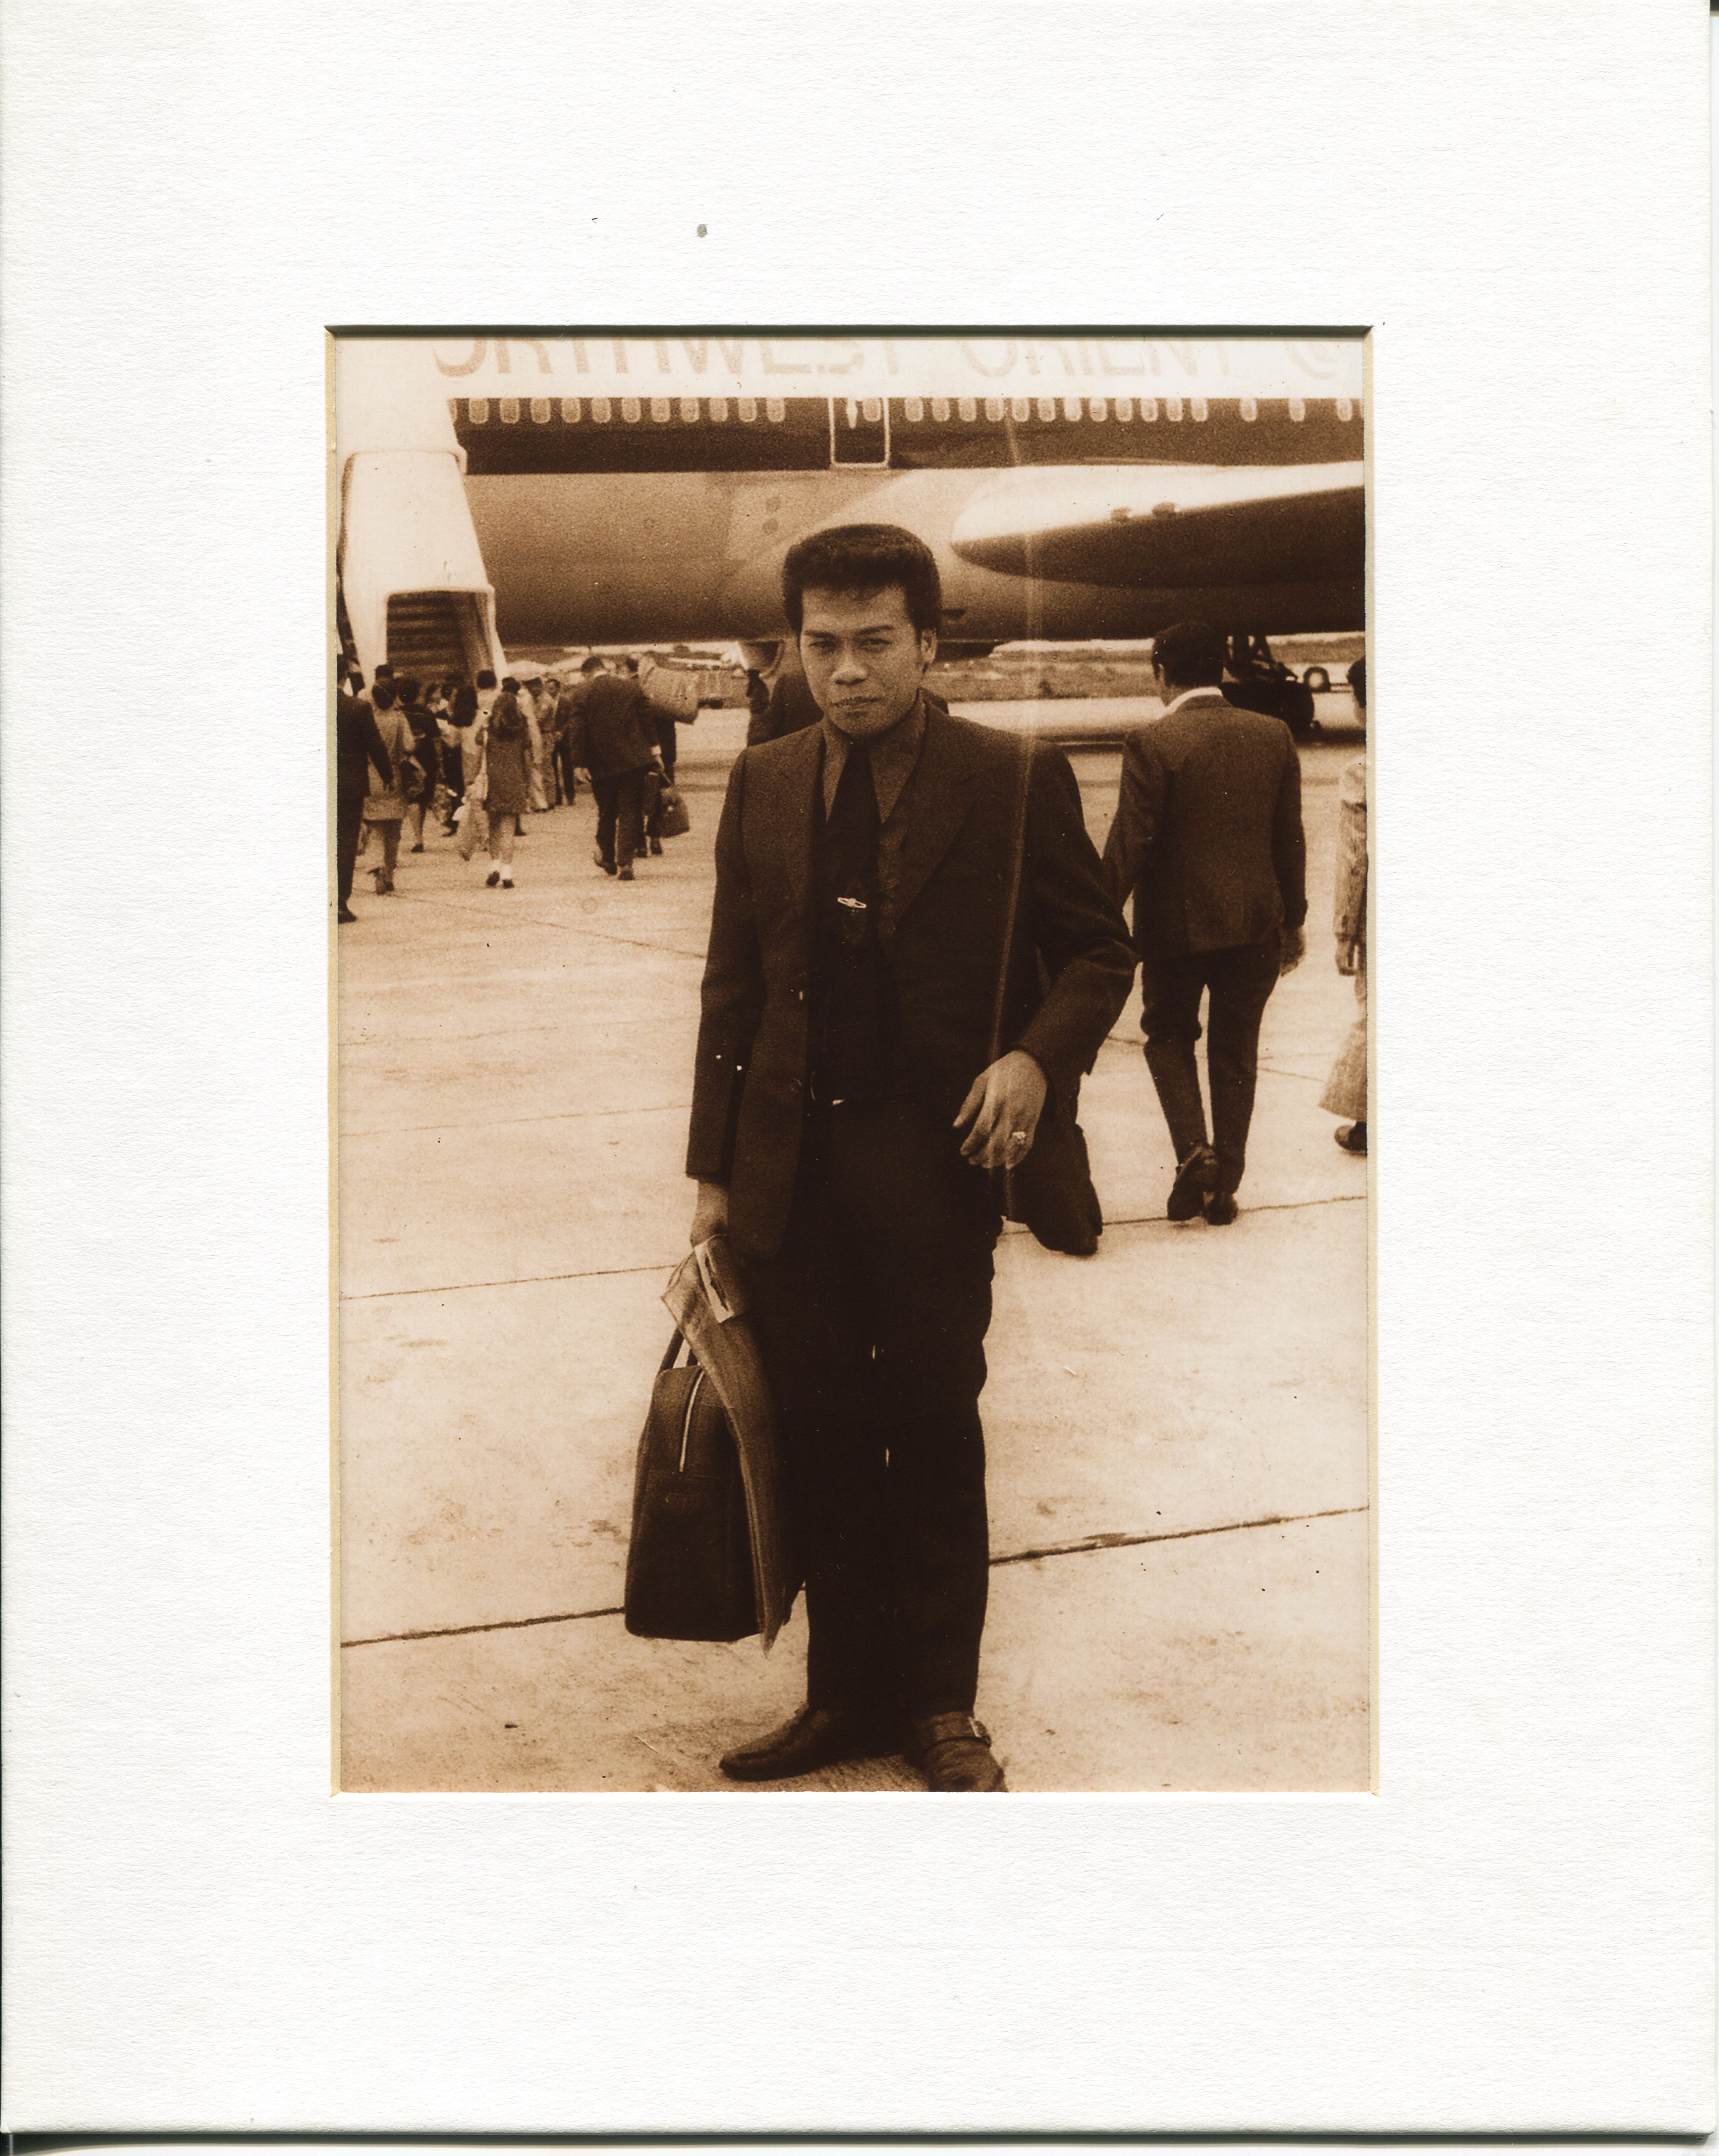 Photo of Virgilio Vergara, Vanessa Vergara's father, June 1972Vergara learned about photo in 2012 from aunt who had the photo hanging on her wall in Solano, Nueva Vizcaya. The photo was taken at the Manila airport and shows Vergara’s father leaving for the US via the Northwest Orient. Pictured: Vergara’s father (Virgilio), “alldressed to the nines”.  Vergara’s paternal grandfather was a tailor at his shop, called Philippines Bazaar, therefore her father had a strong fashion sense. Vergara’s father is wearing a tie and coat and has a small piece of hand-carry luggage (containing his paperworkfor emigration- all he brought with him.) He has a flat top haircut which was “in vogue at the time.” She said he has a nice smile and looks confident but a bit uneasy.  In 1972, Vergara’s father was the oldest of six and as such had a responsibility to help hisfamily. Vergara said he emigrated for financial opportunities. Vergara’s father planned to enter the US at Port of Maine but, at the last minute, it was changed to Chicago. There, Vergara’s father met his future boss and future father-in-law. In 1970, Vergara’s motherwas petitioned by her father, who was Virgilio’s boss. Vergara said she is very proud of how her father worked hard to come to the USA and encouraged his children to get the best education. Vergara wants to keep stories alive as was as heritage. Any views, findings, conclusions, or recommendations expressed in this story do not necessarily represent those of the National Endowment for the Humanities. 